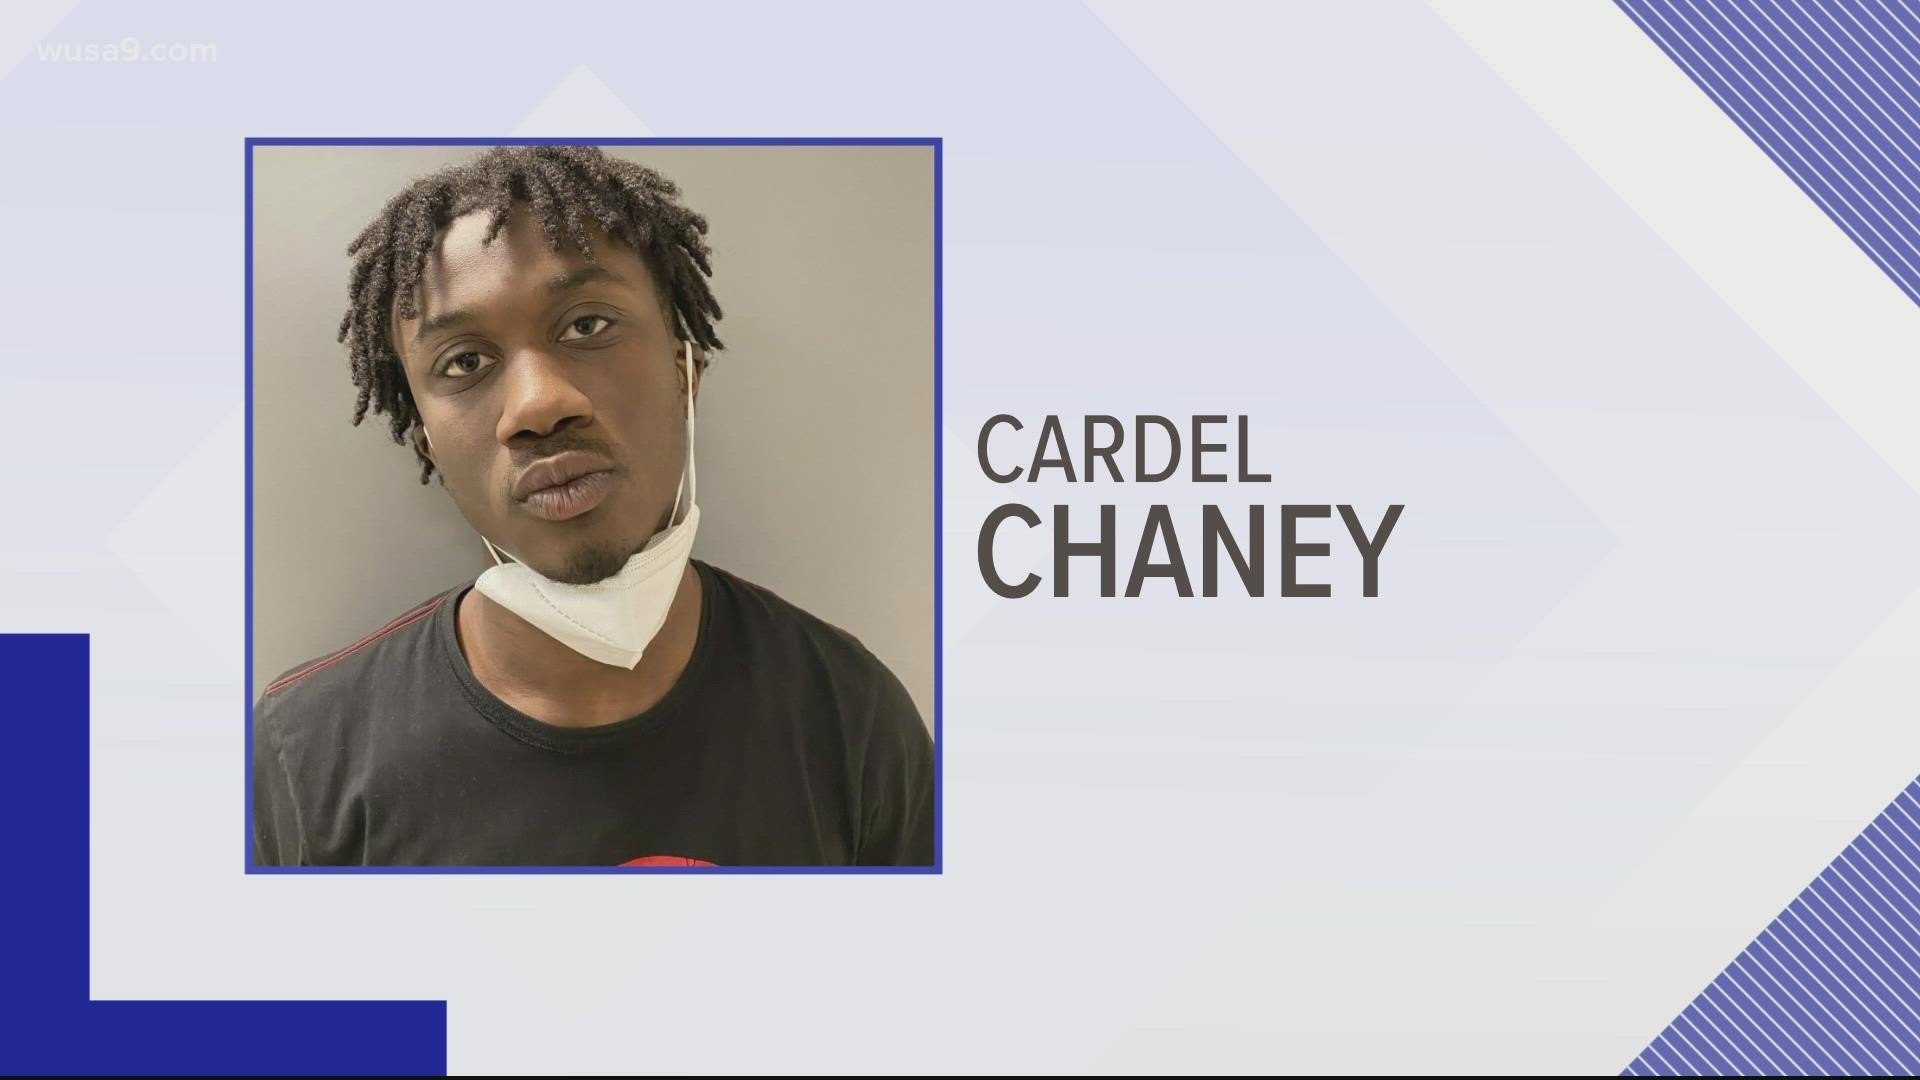 Cardel Chaney, 20, of Silver Spring was arrested and faces second degree murder charges. Devin Dickey, 17, of Silver Spring died from a gunshot injury.